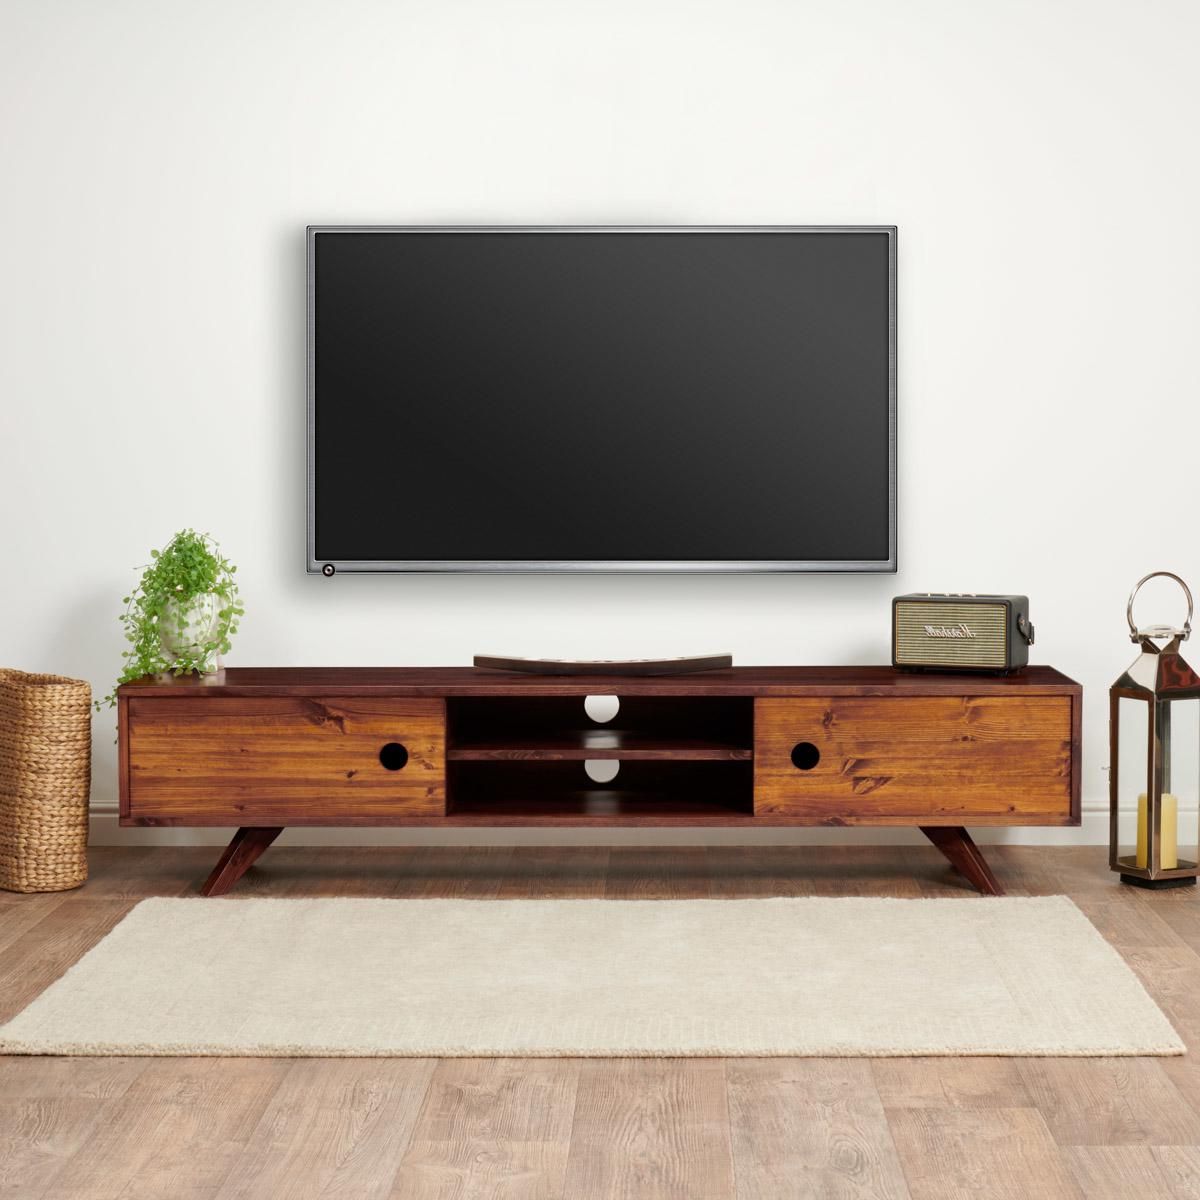 Solid Wood Tv Unit With Storage | 180cm Wide | Handcrafted Throughout Wide Entertainment Centers (View 14 of 20)